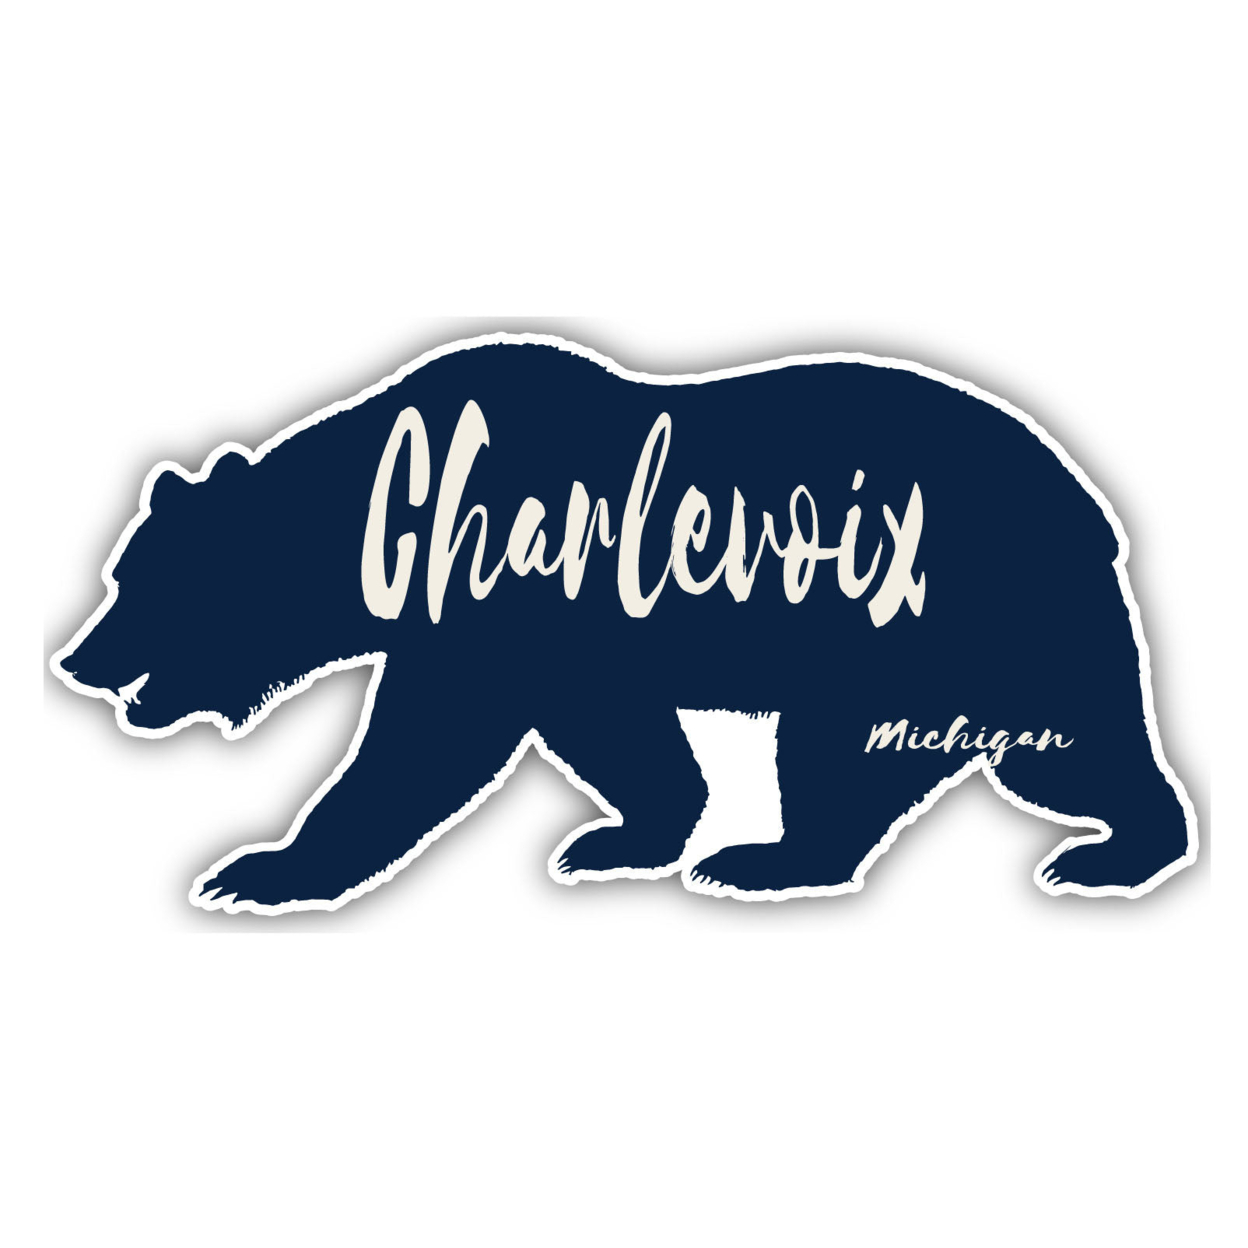 Charlevoix Michigan Souvenir Decorative Stickers (Choose Theme And Size) - 4-Pack, 10-Inch, Bear